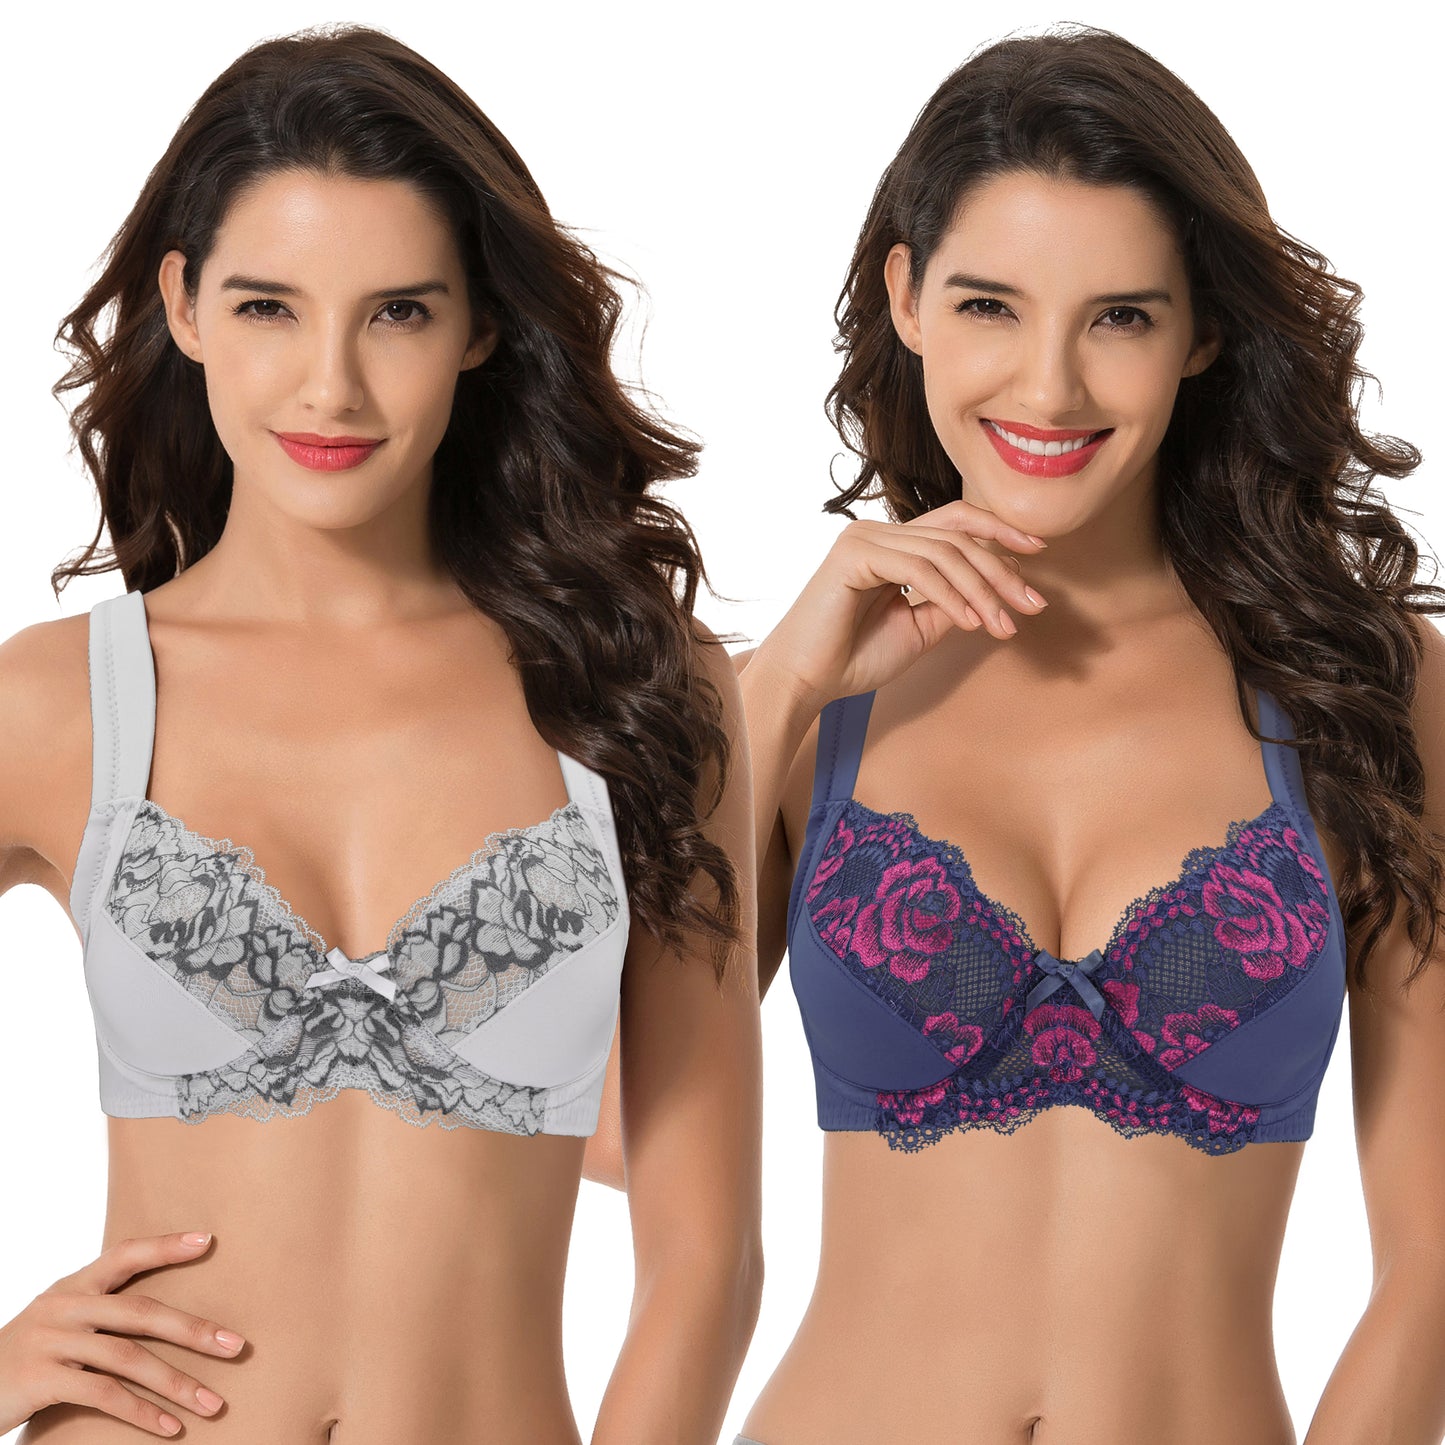 Women's Plus Size Unlined Underwire Lace Bra with Cushion Straps-Light Grey,Navy